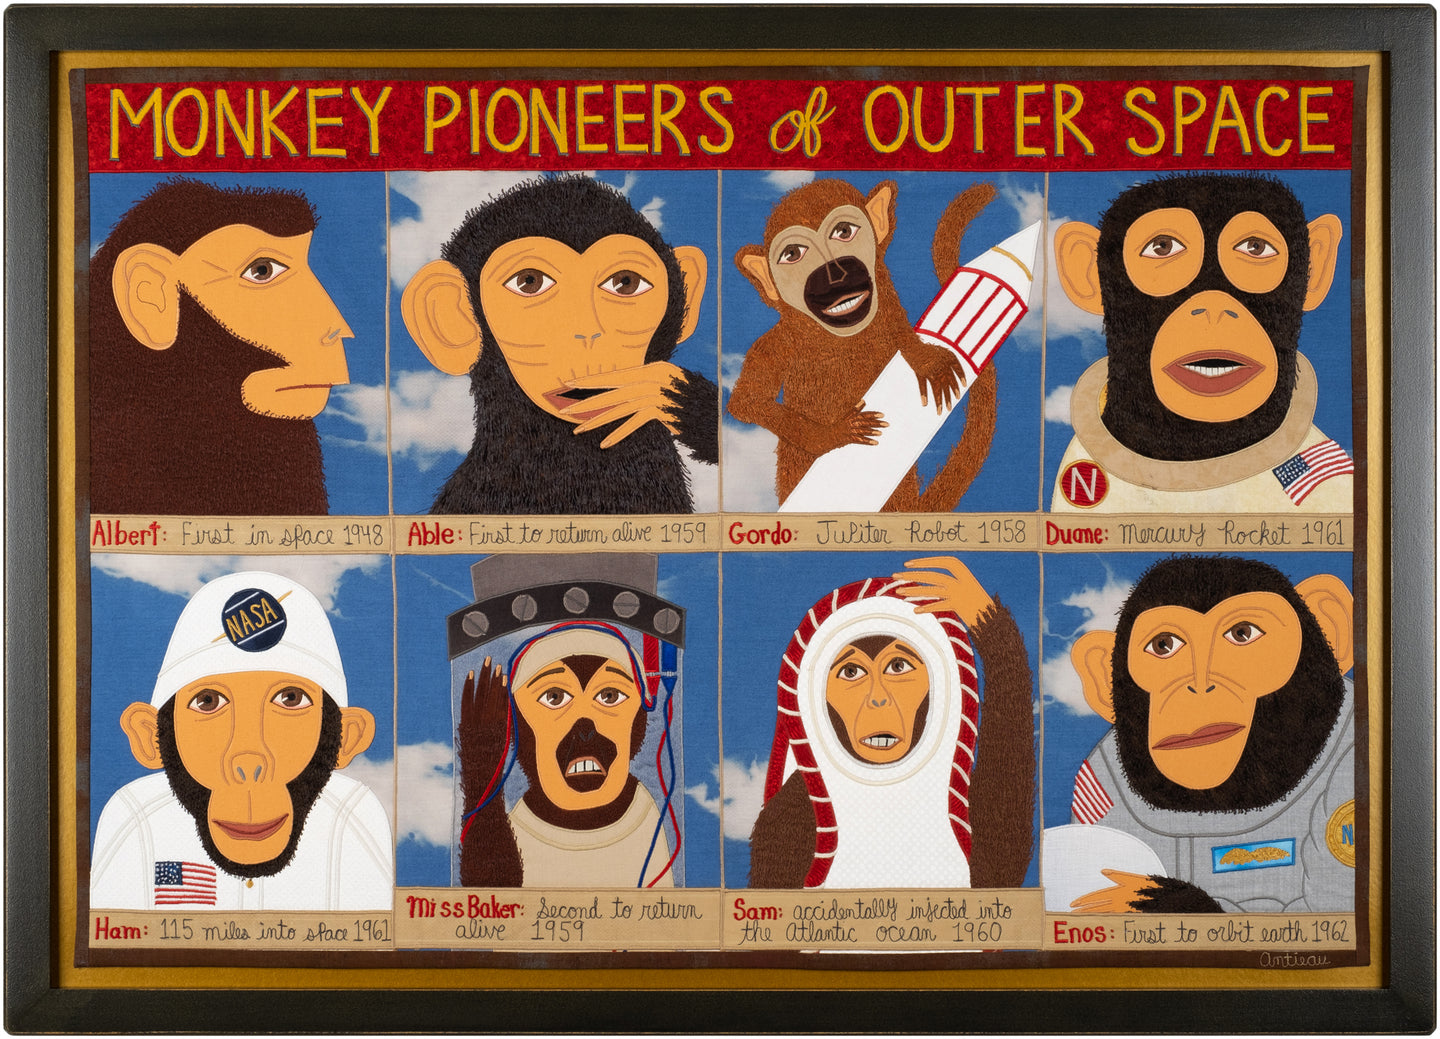 Monkey Pioneers of Outerspace